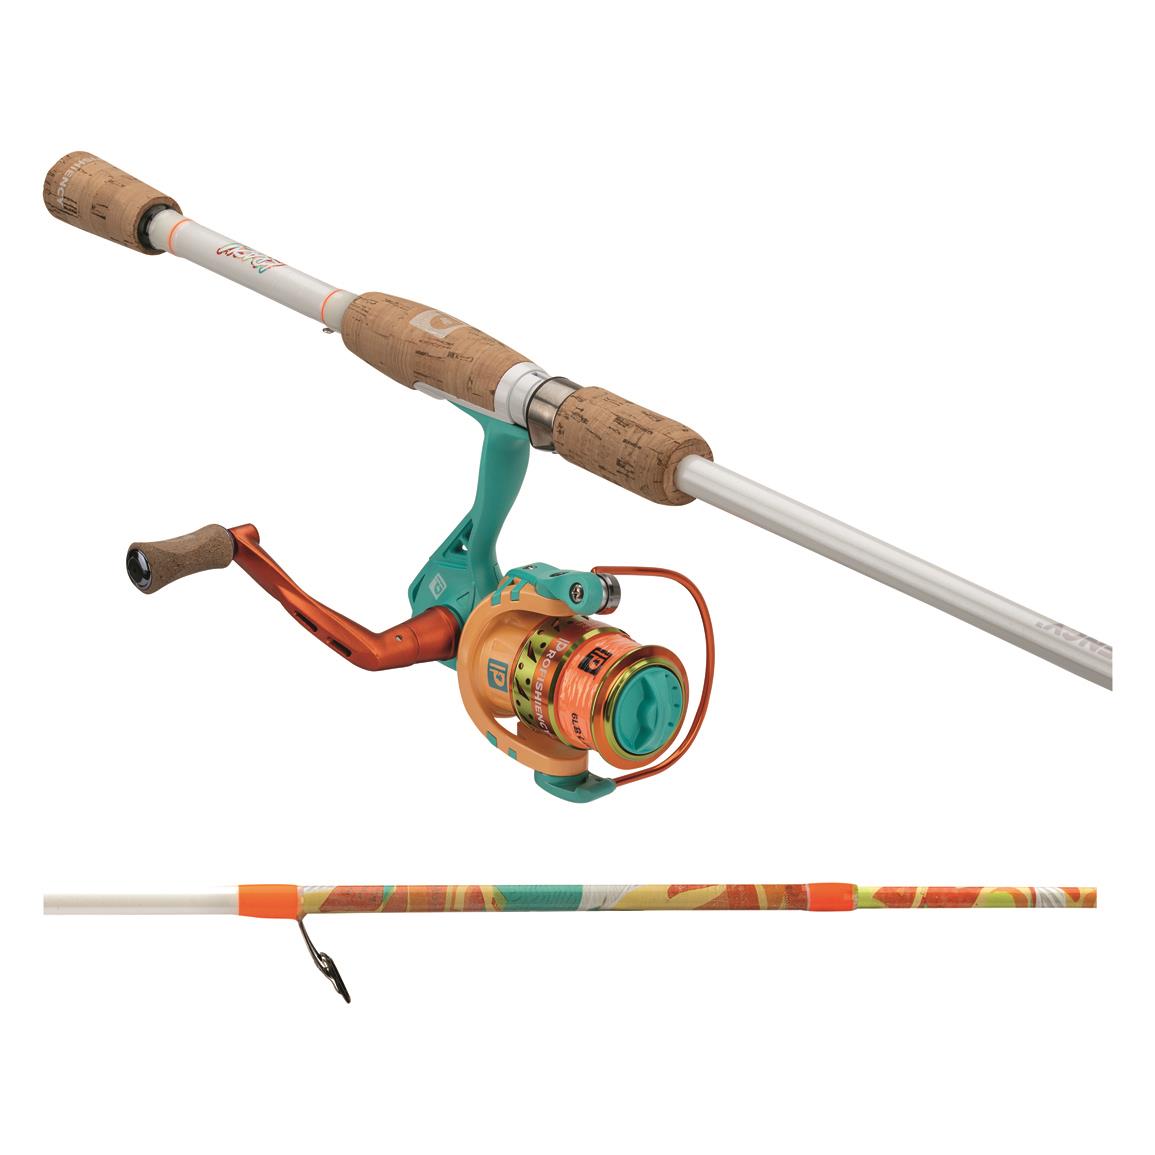 13 Fishing Code NX Spinning Combo, 6'10 Length, Medium Light Power, 2000  Reel Size, 2 Piece - 729830, Spinning Combos at Sportsman's Guide